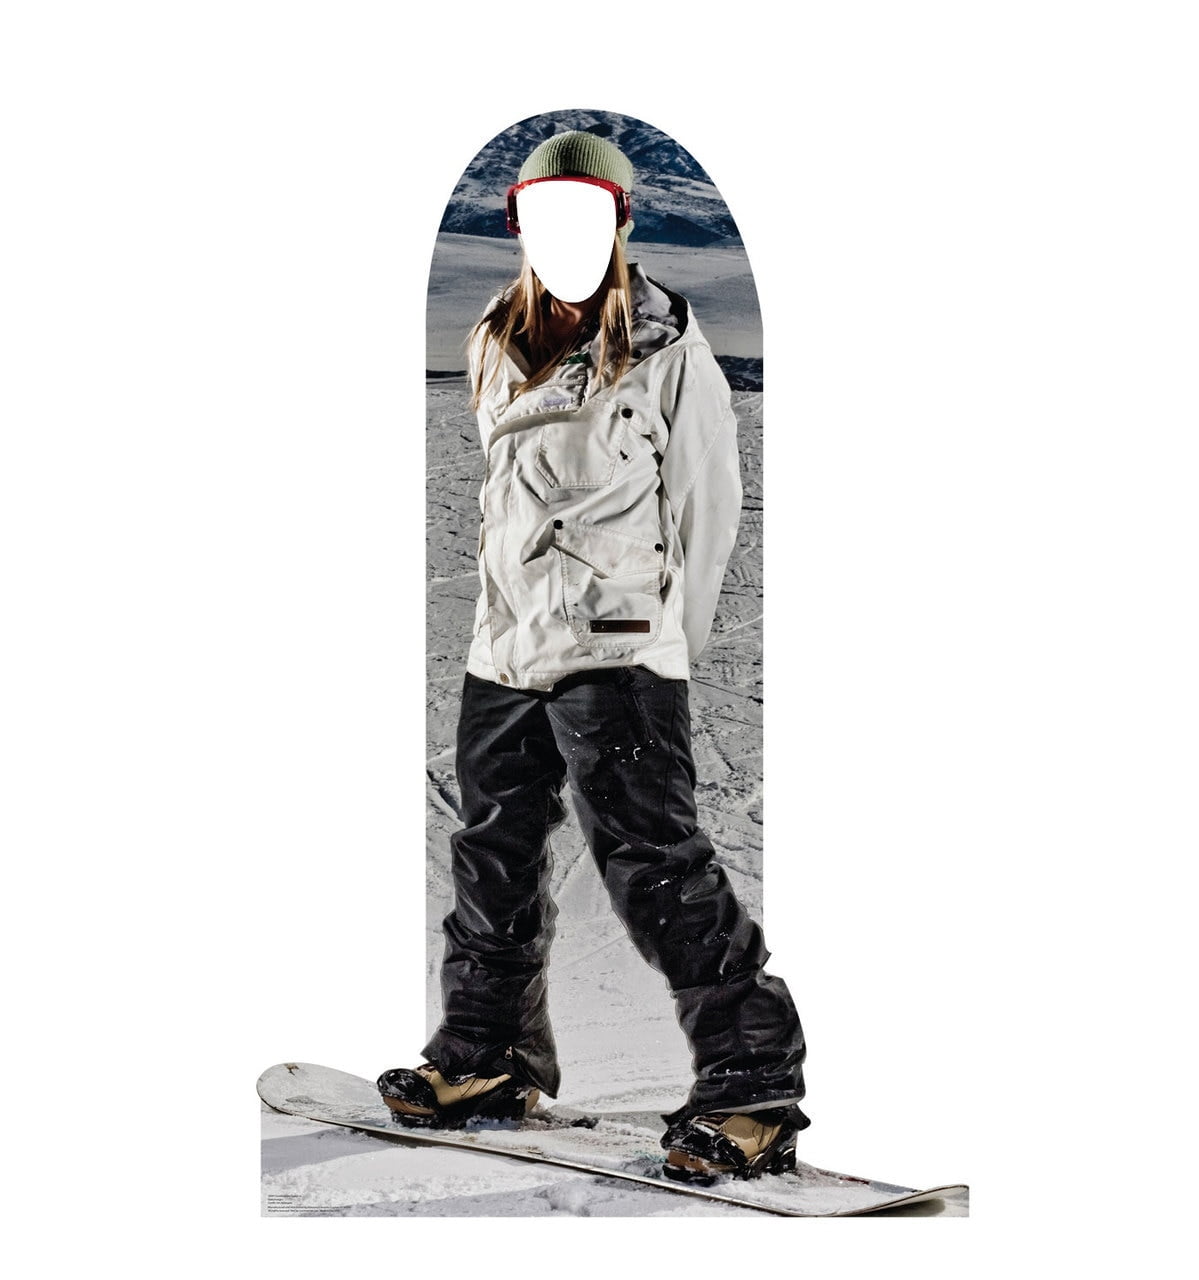 Picture of Advanced Graphics 2669 42 x 65 in. Snowboarder Standin Wall Decal